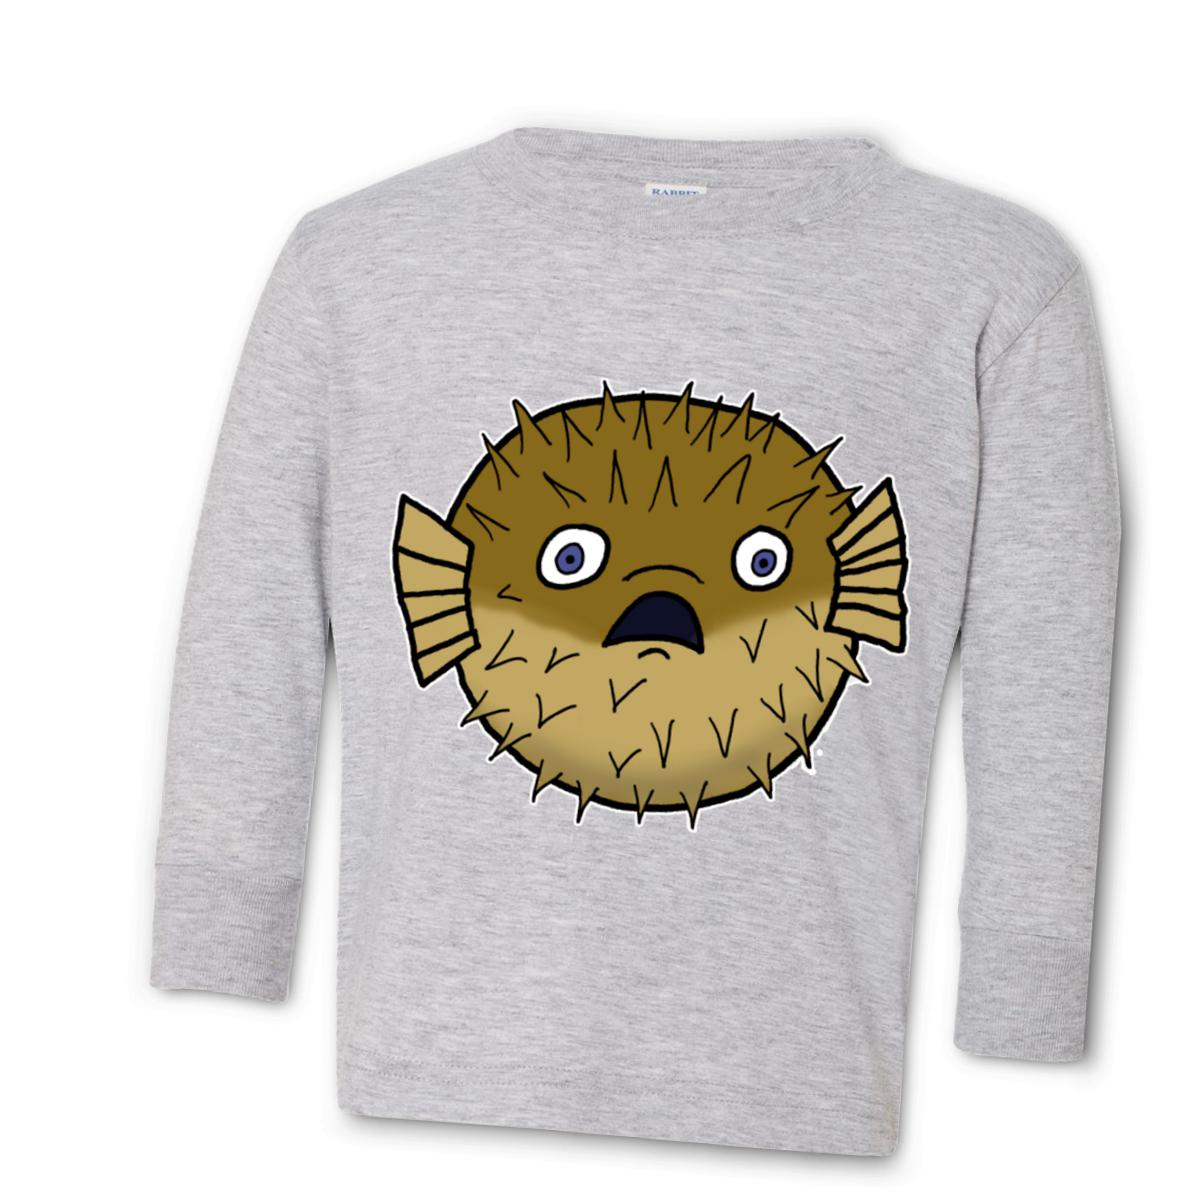 Puffer Fish Toddler Long Sleeve Tee 2T heather